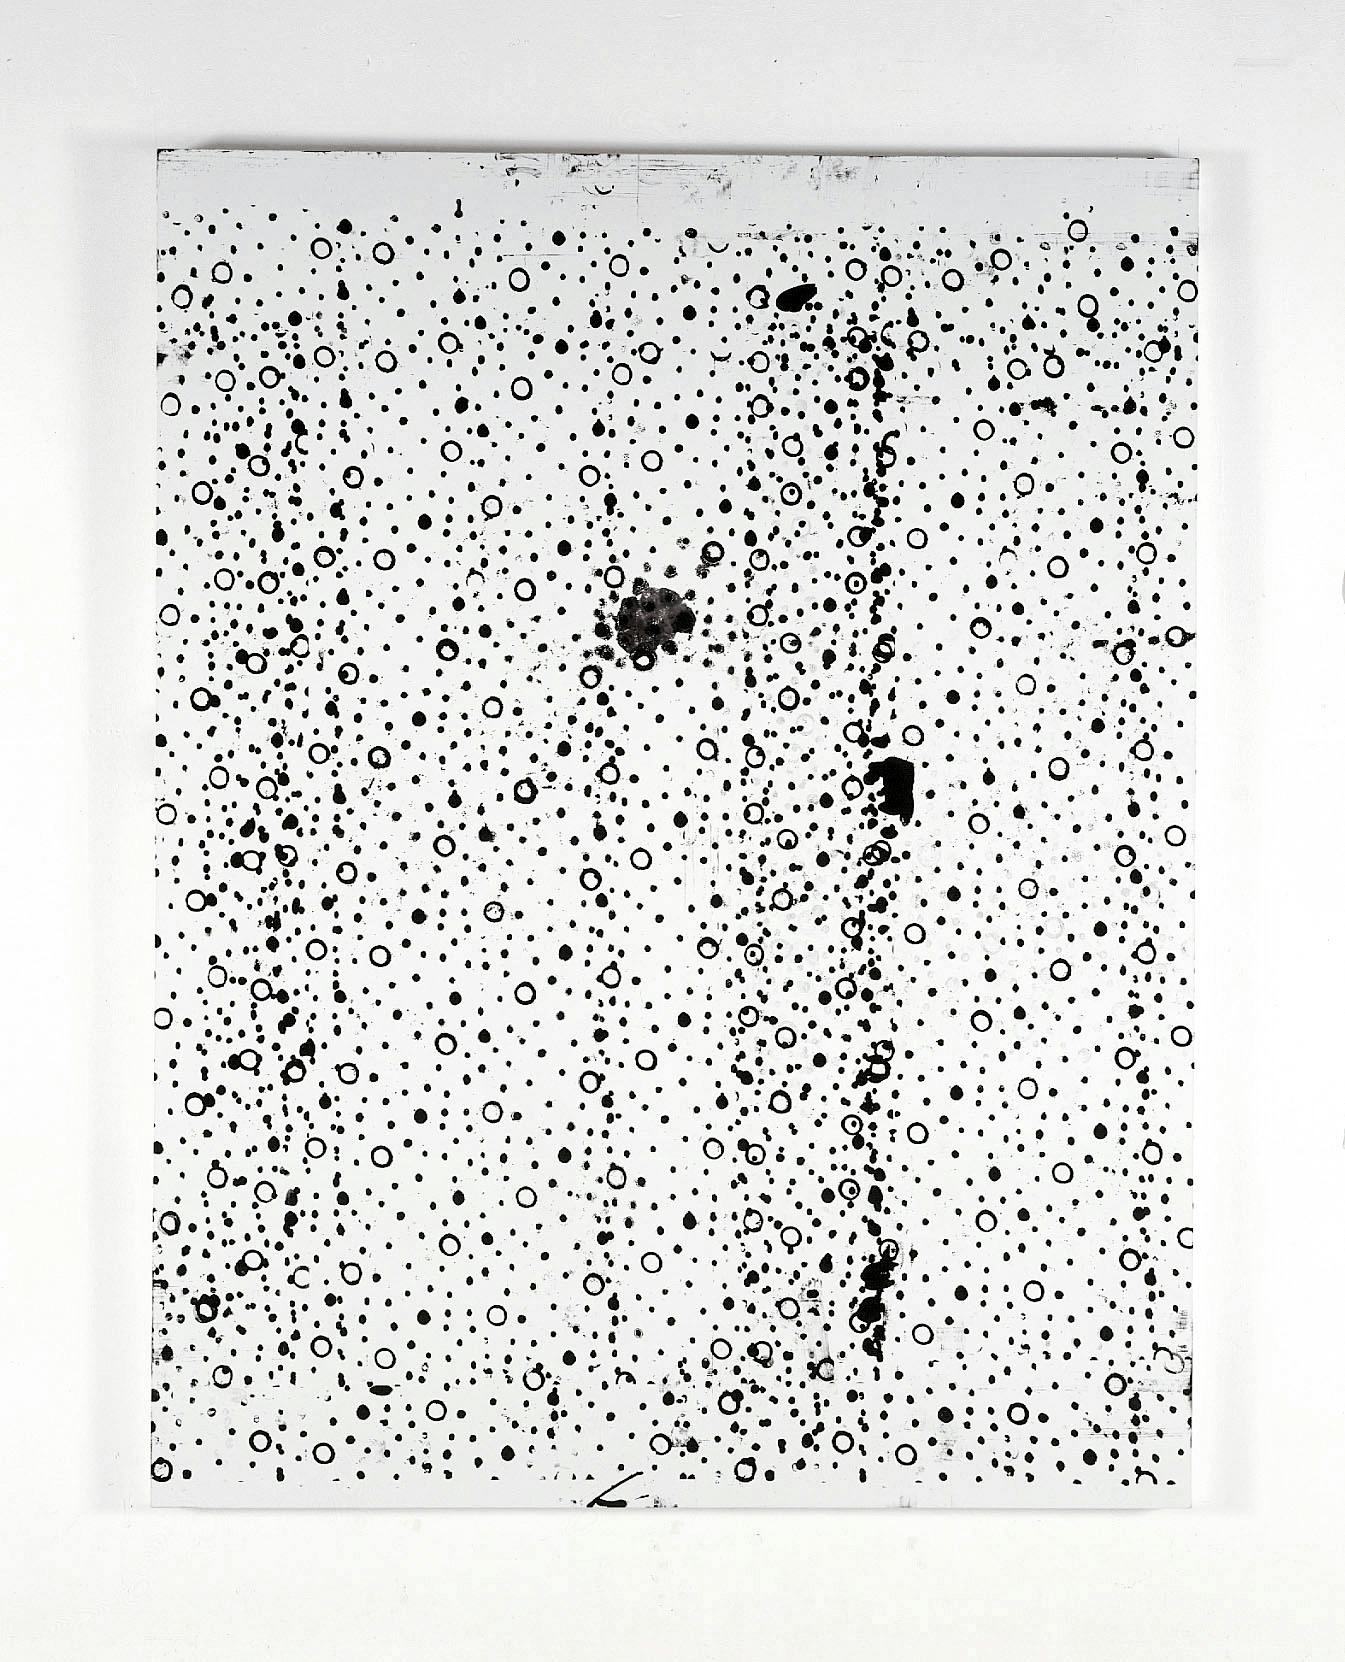 An image of a vertically oriented painting; the background is white and across the surface is a black pattern of dots and circles with irregularities and splotches.